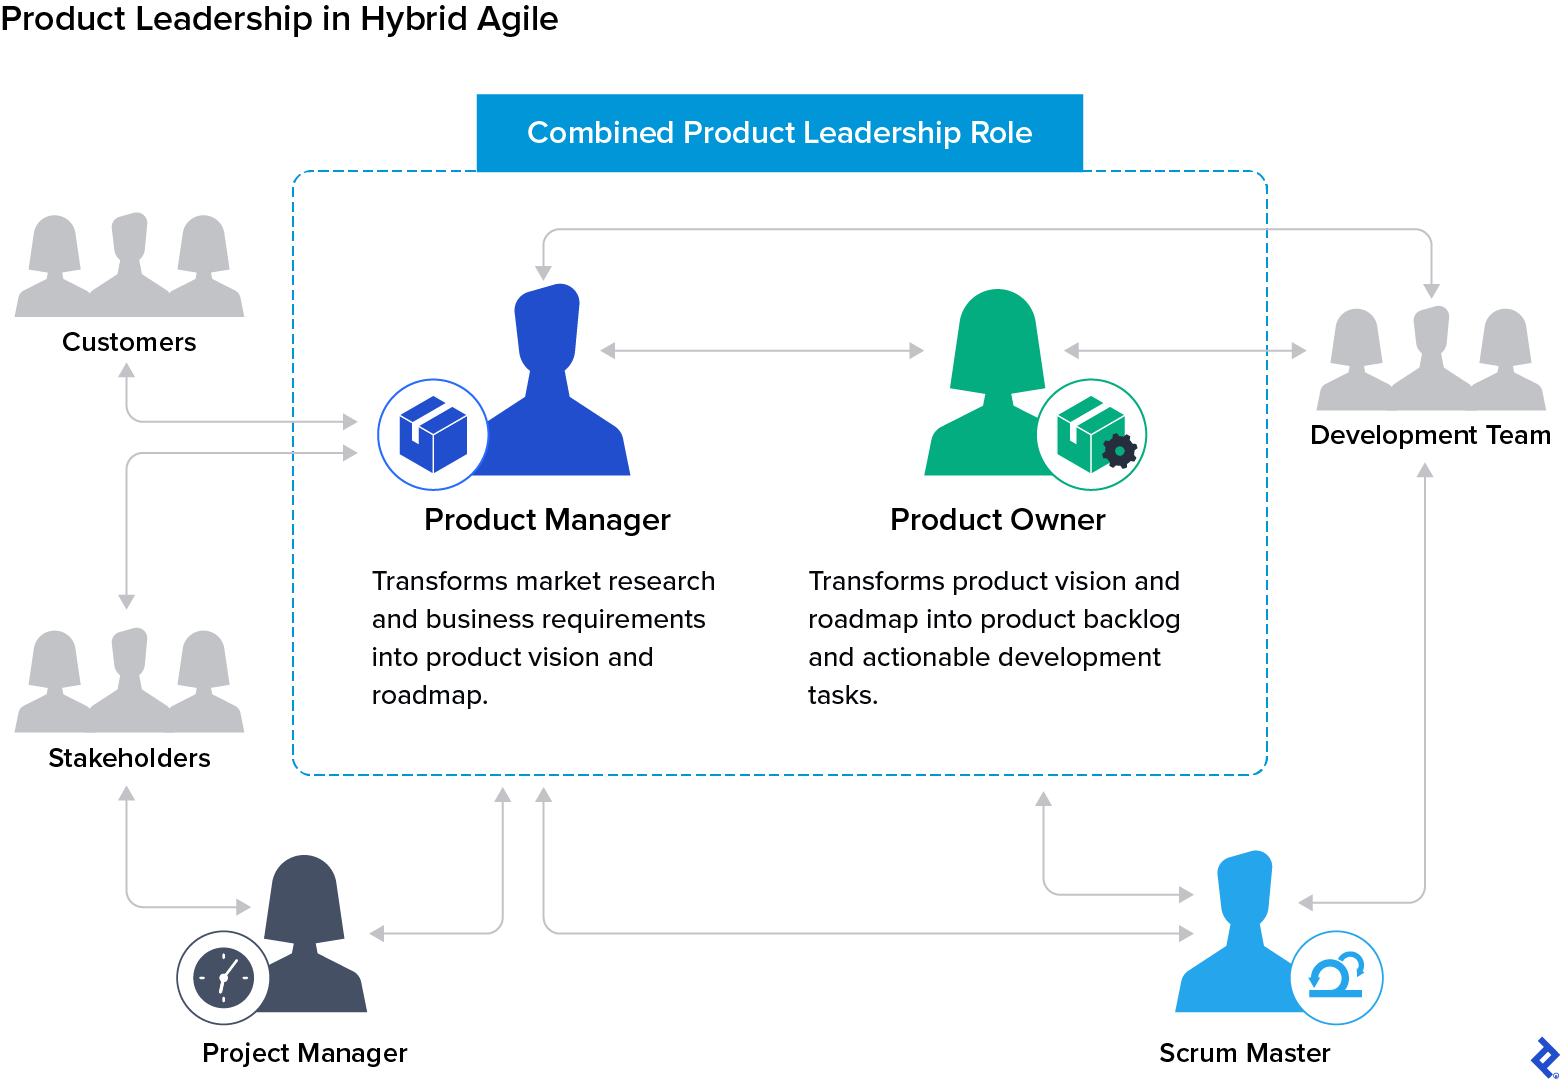 Arrows map the relationships between the product manager, product owner, and other Agile roles involved in product leadership.